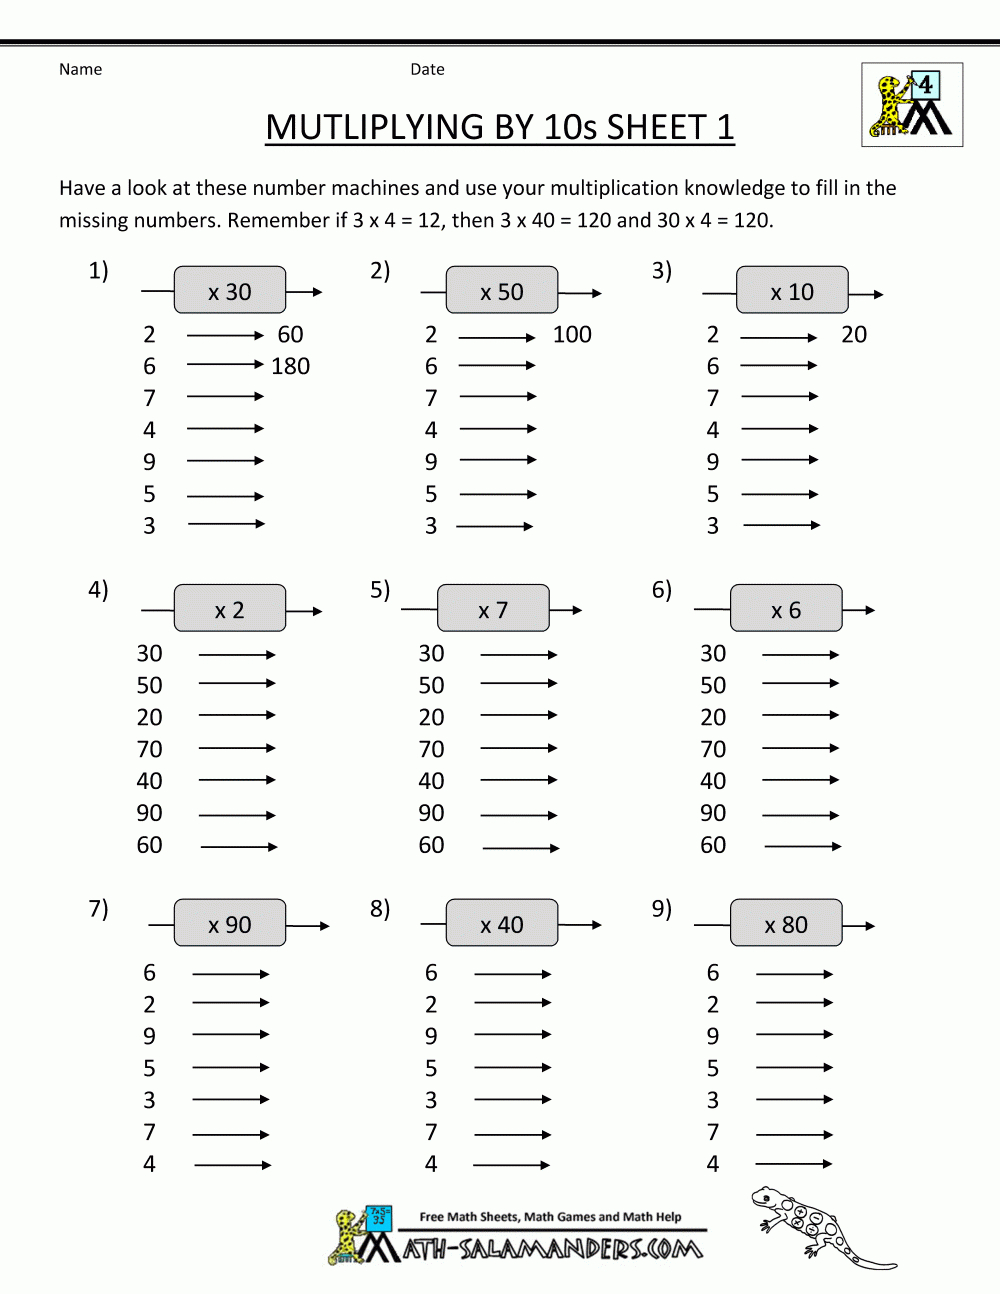 Multiplication Fact Sheets - Free Printable Worksheets For 4Th Grade